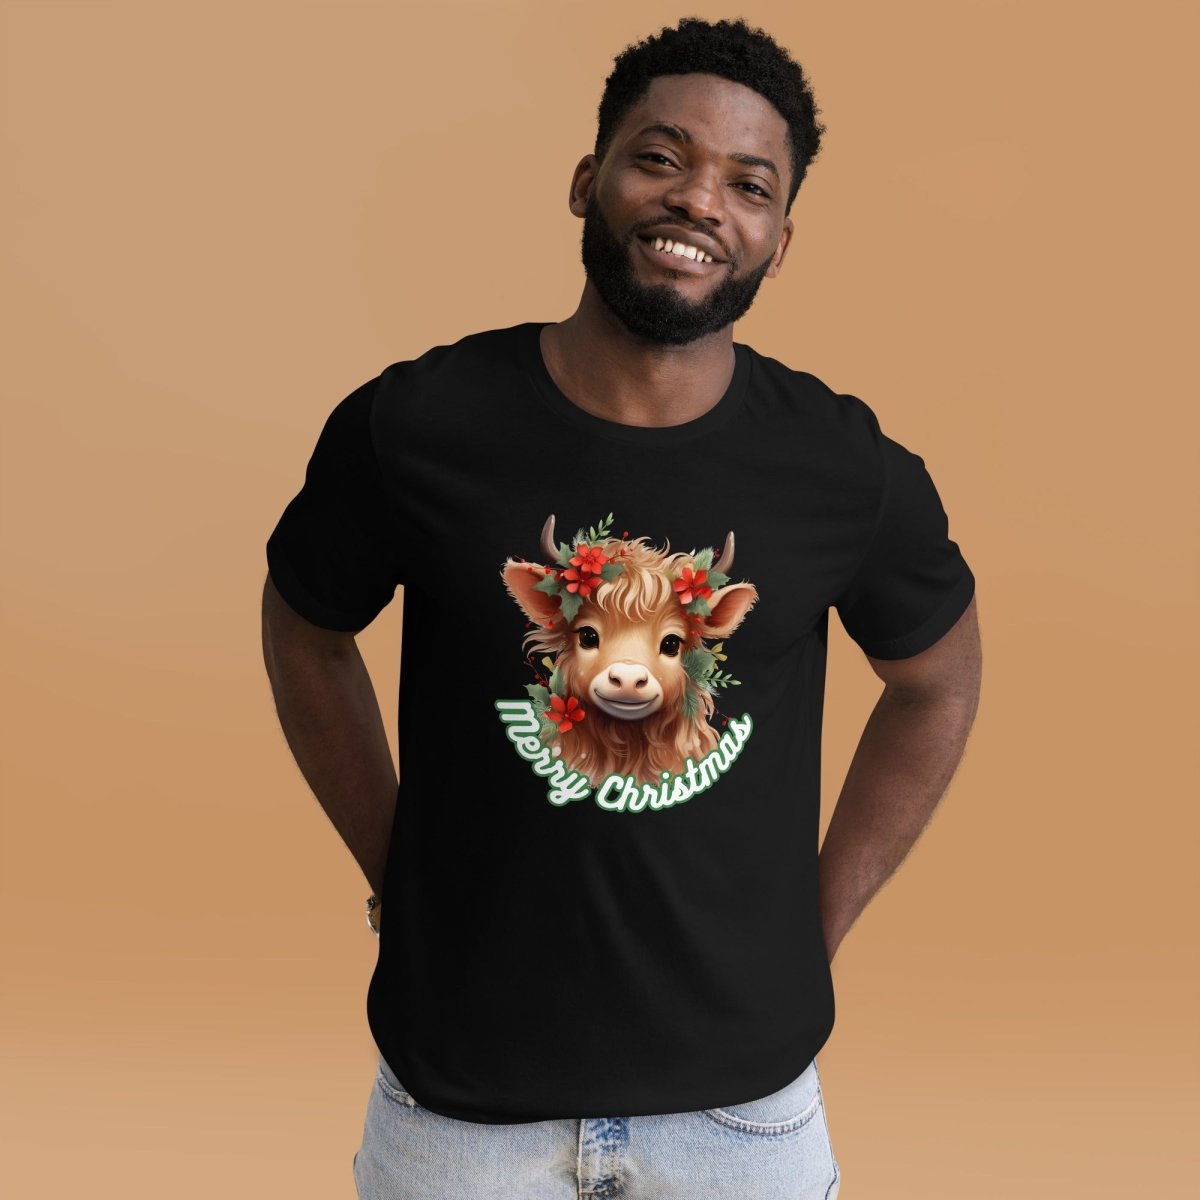 Christmas Highland Cow T-Shirt - High Quality Festive Family Unisex T-Shirts, Gift for Cow Lovers, Cute Christmas Shirt, Farmer Gift - Everything Pixel